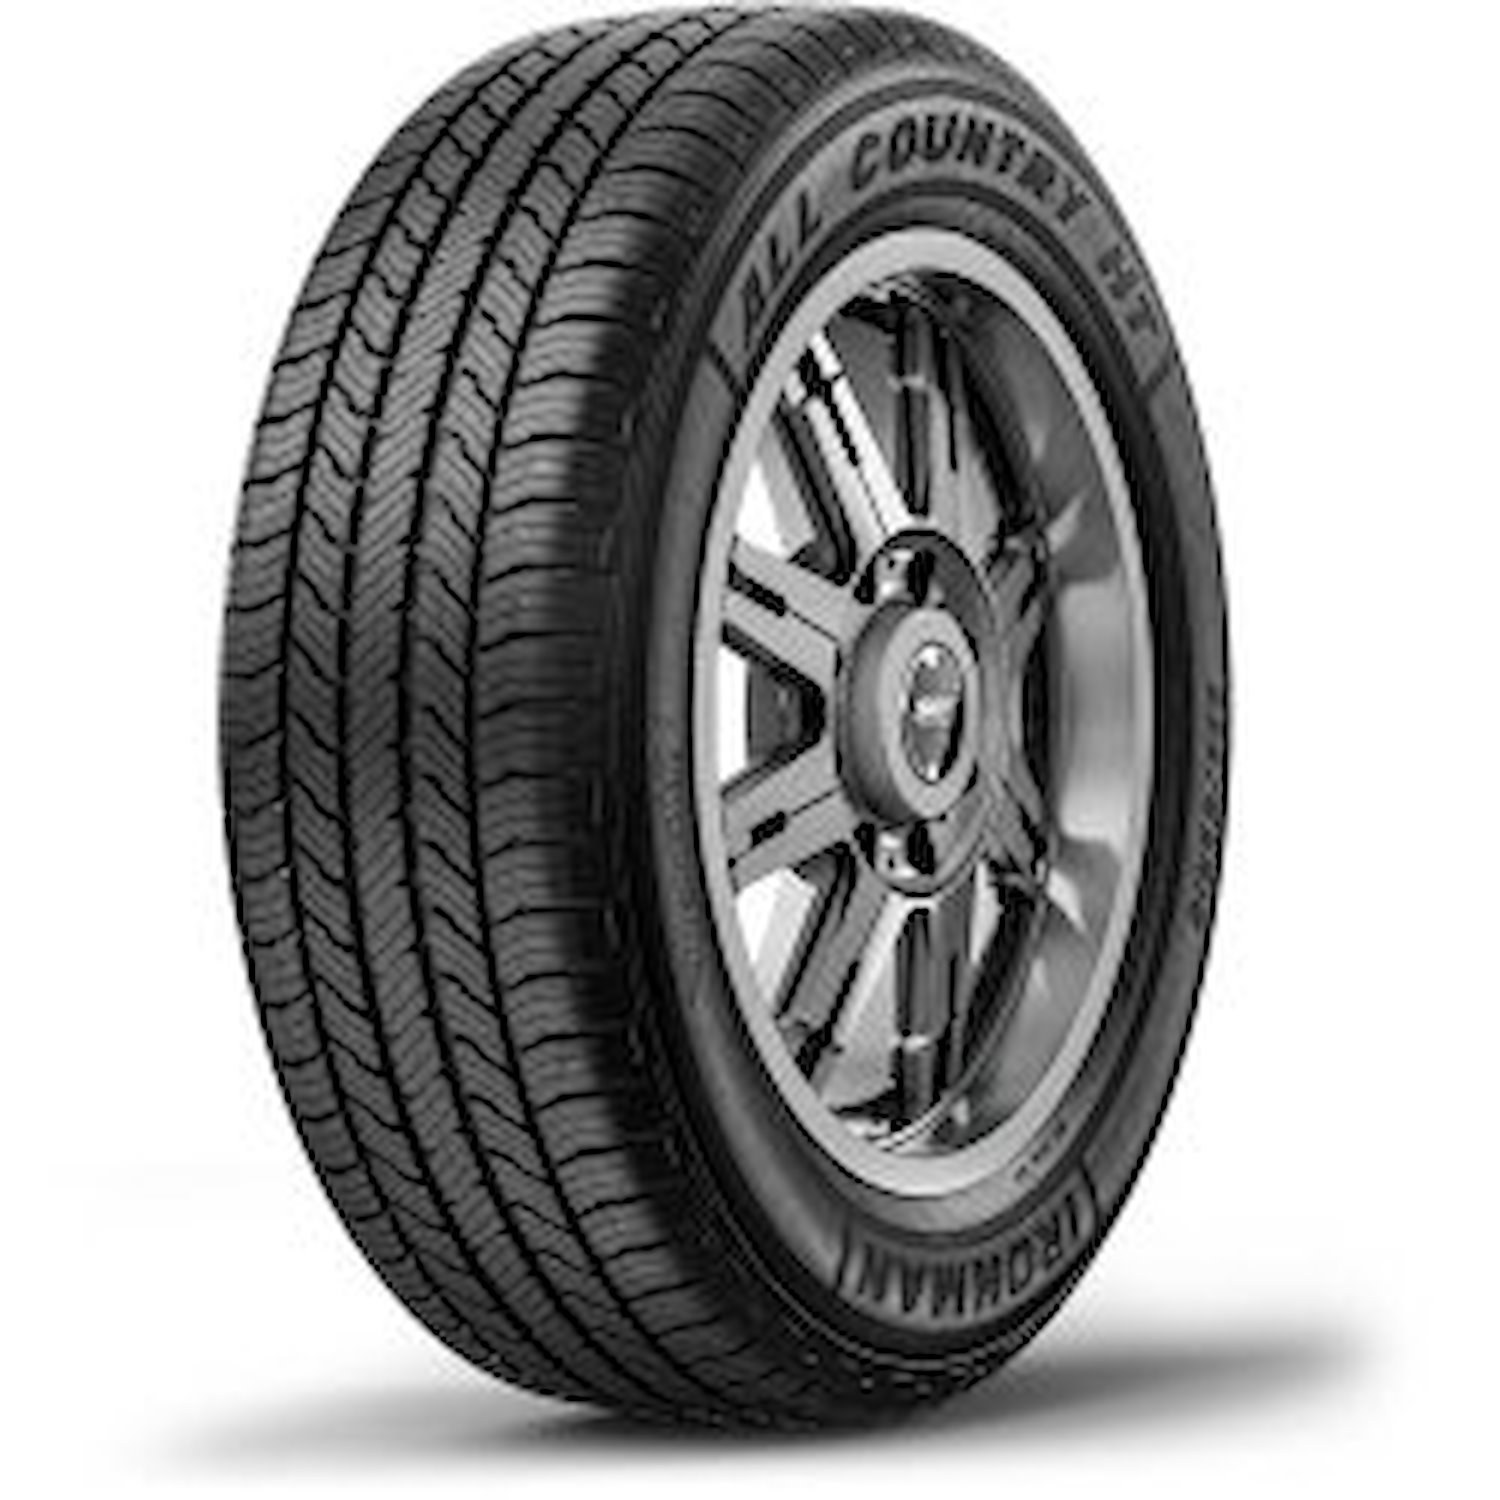 03088 All Country HT Tire, 215/70R16, 100T